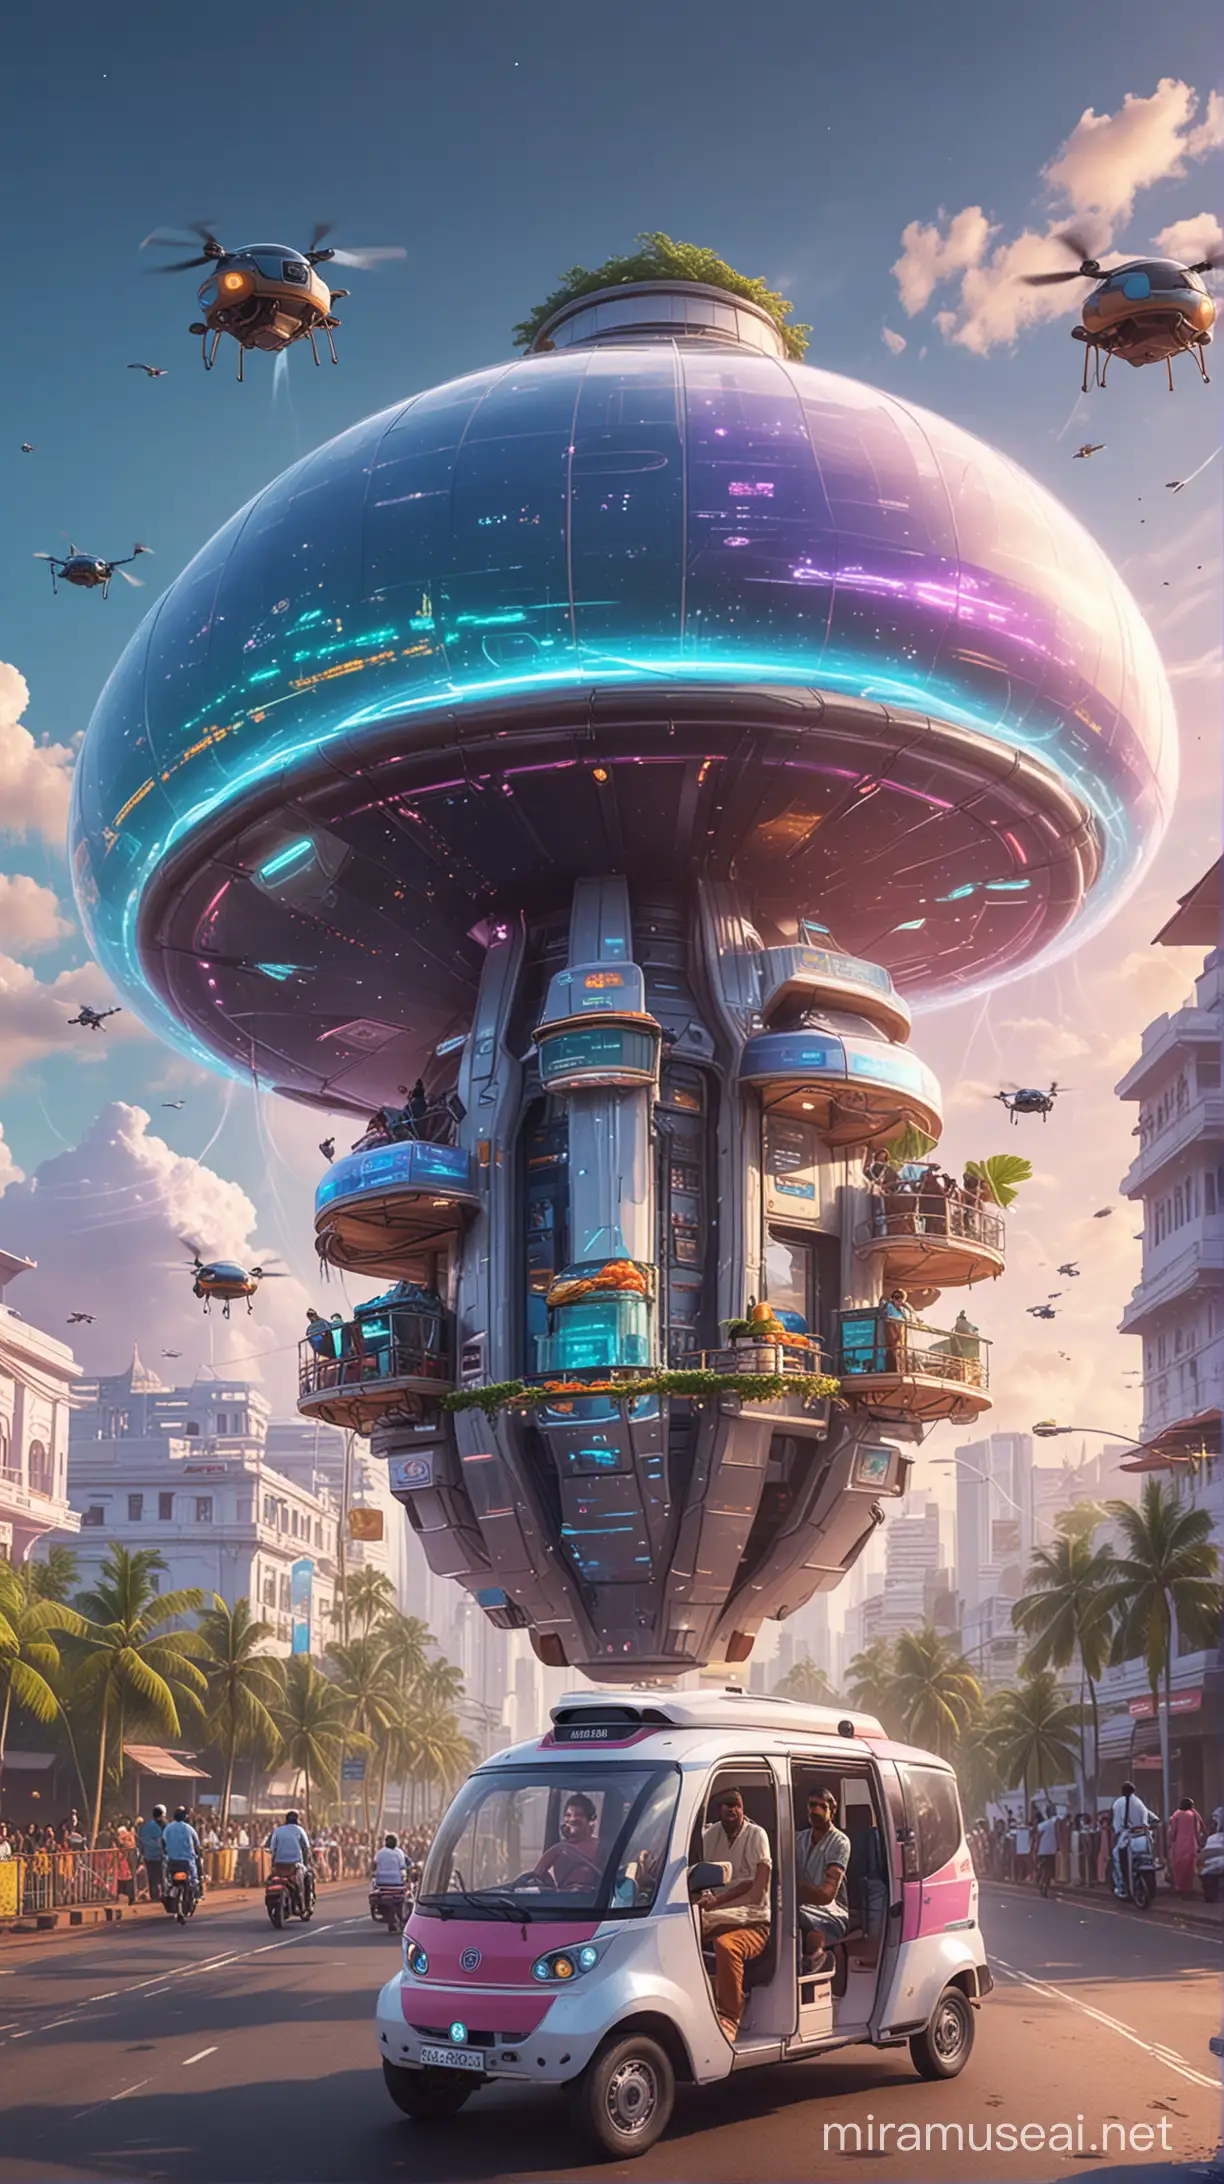 an illustration of a futuristic food pod with kerala building behind and autorikshaw drivers and autos infront with drones delivering food and pooja people in the sky in an hoverboard and holograms in the sky